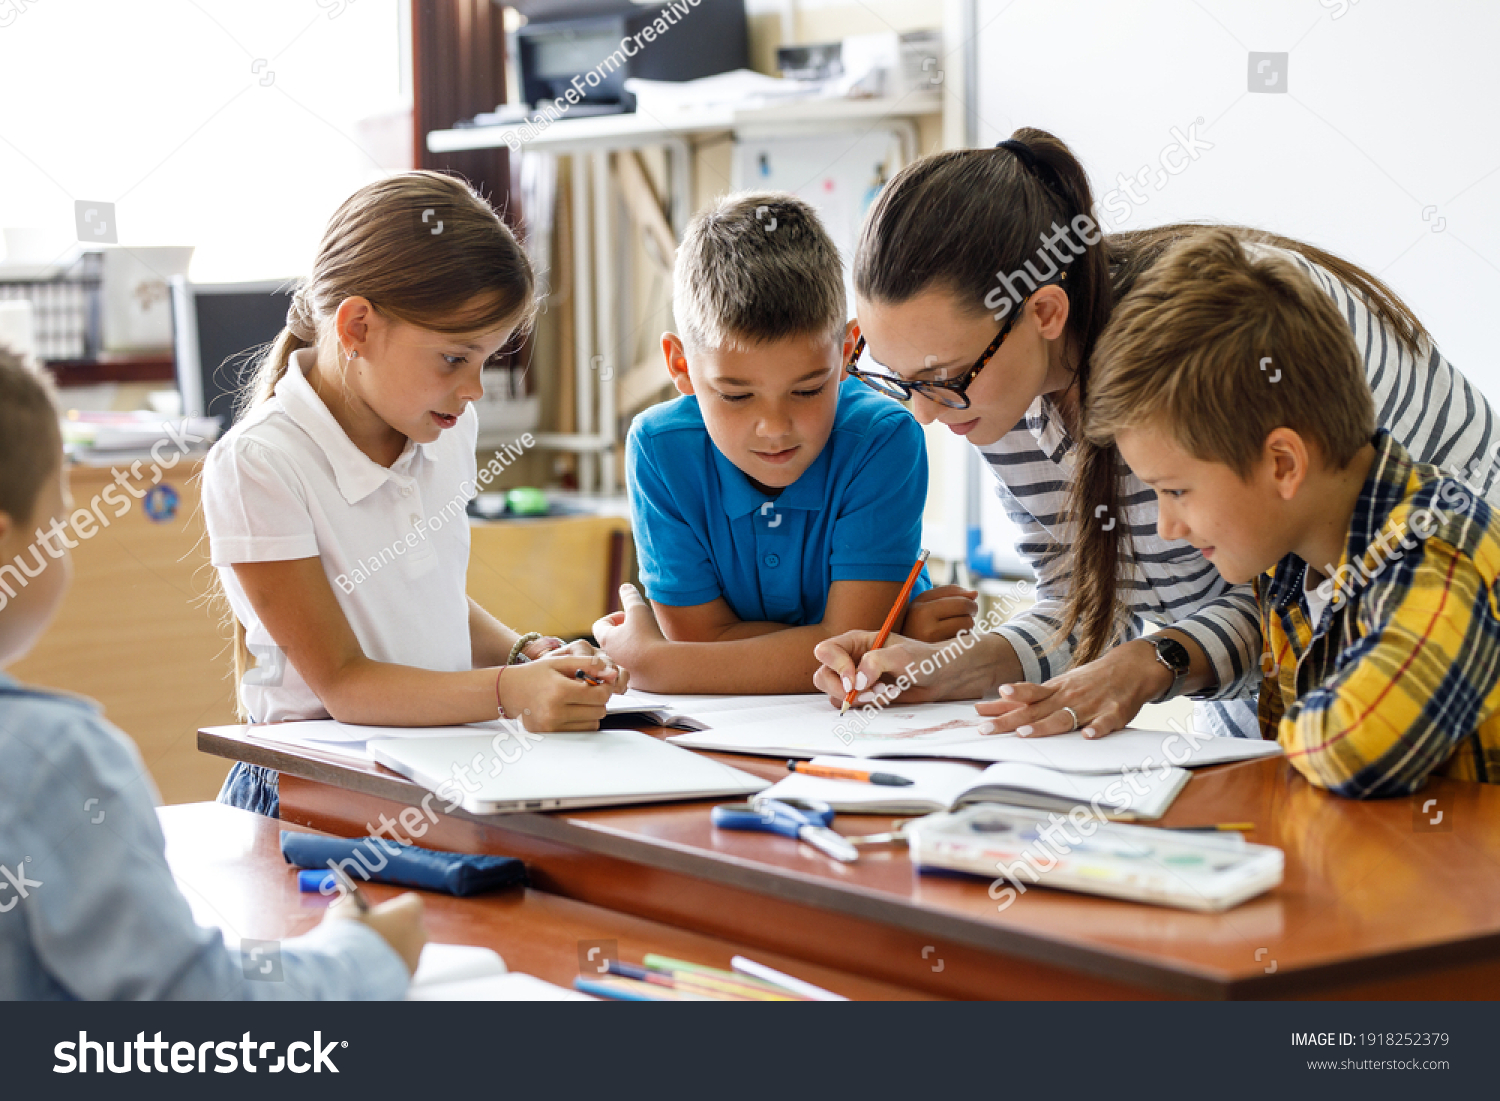 Female teacher helps school kids to finish they lesson.They sitting all together at one desk.	
 #1918252379